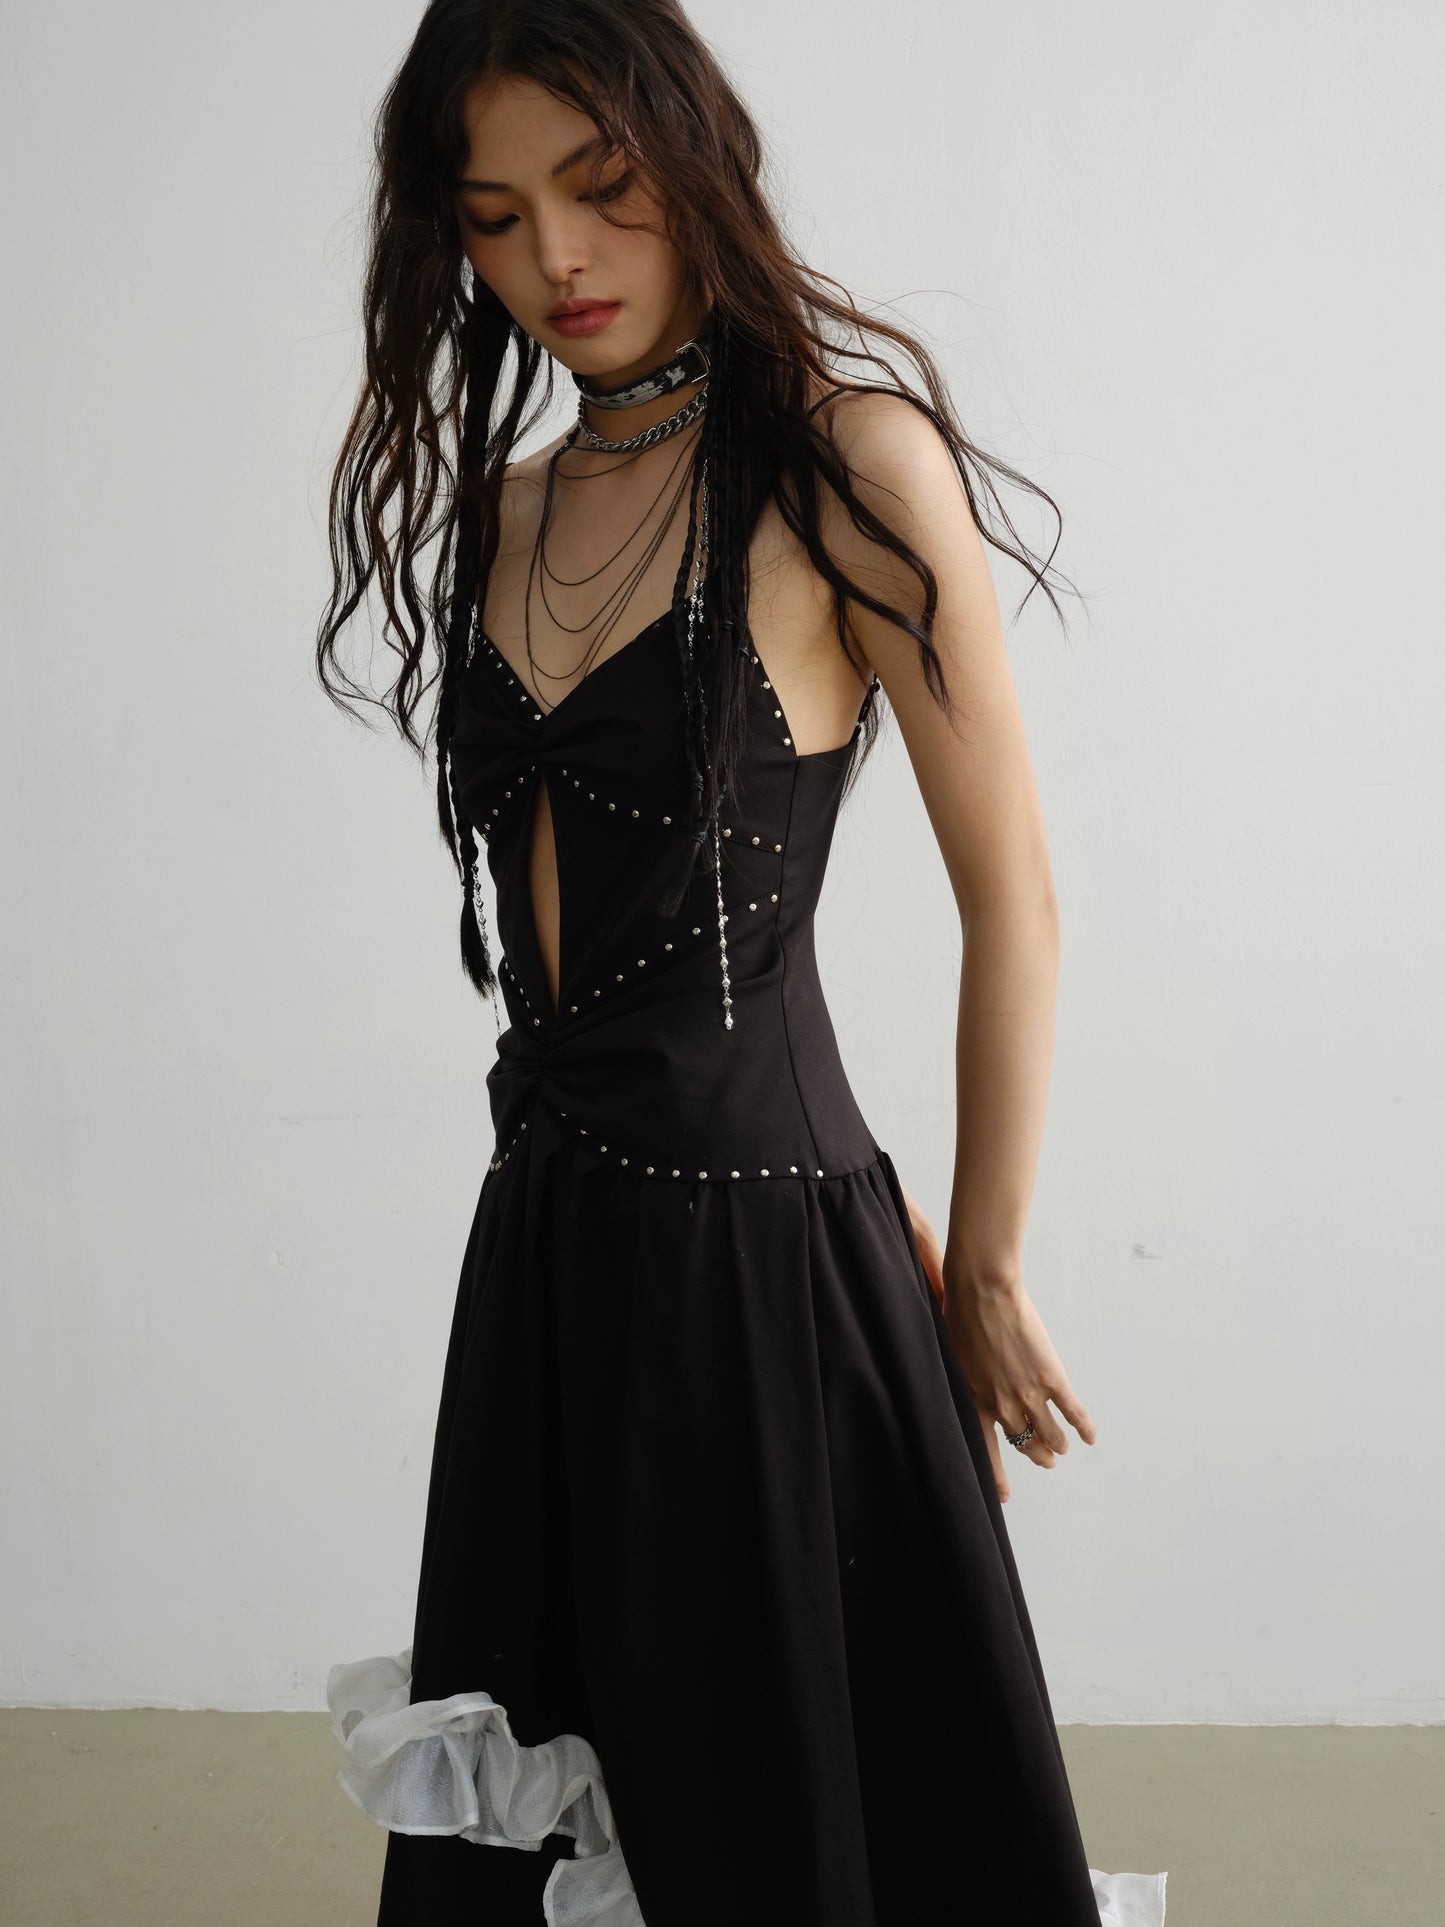 Rivet Contrasting Lace Camisole Skirt